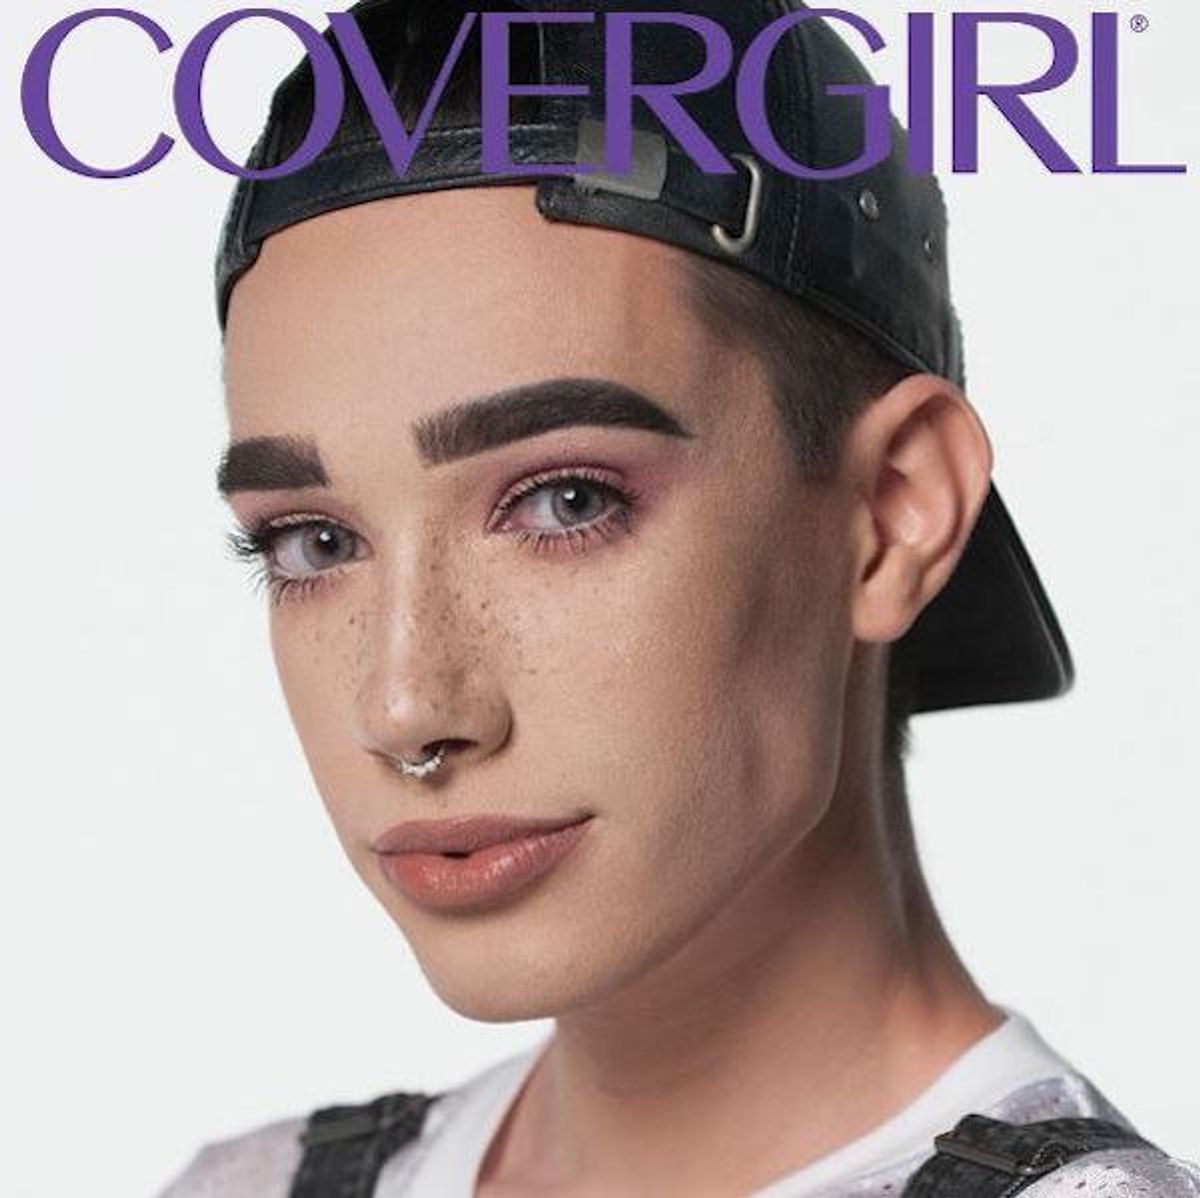 CoverGirl's First Ever Male Spokesman